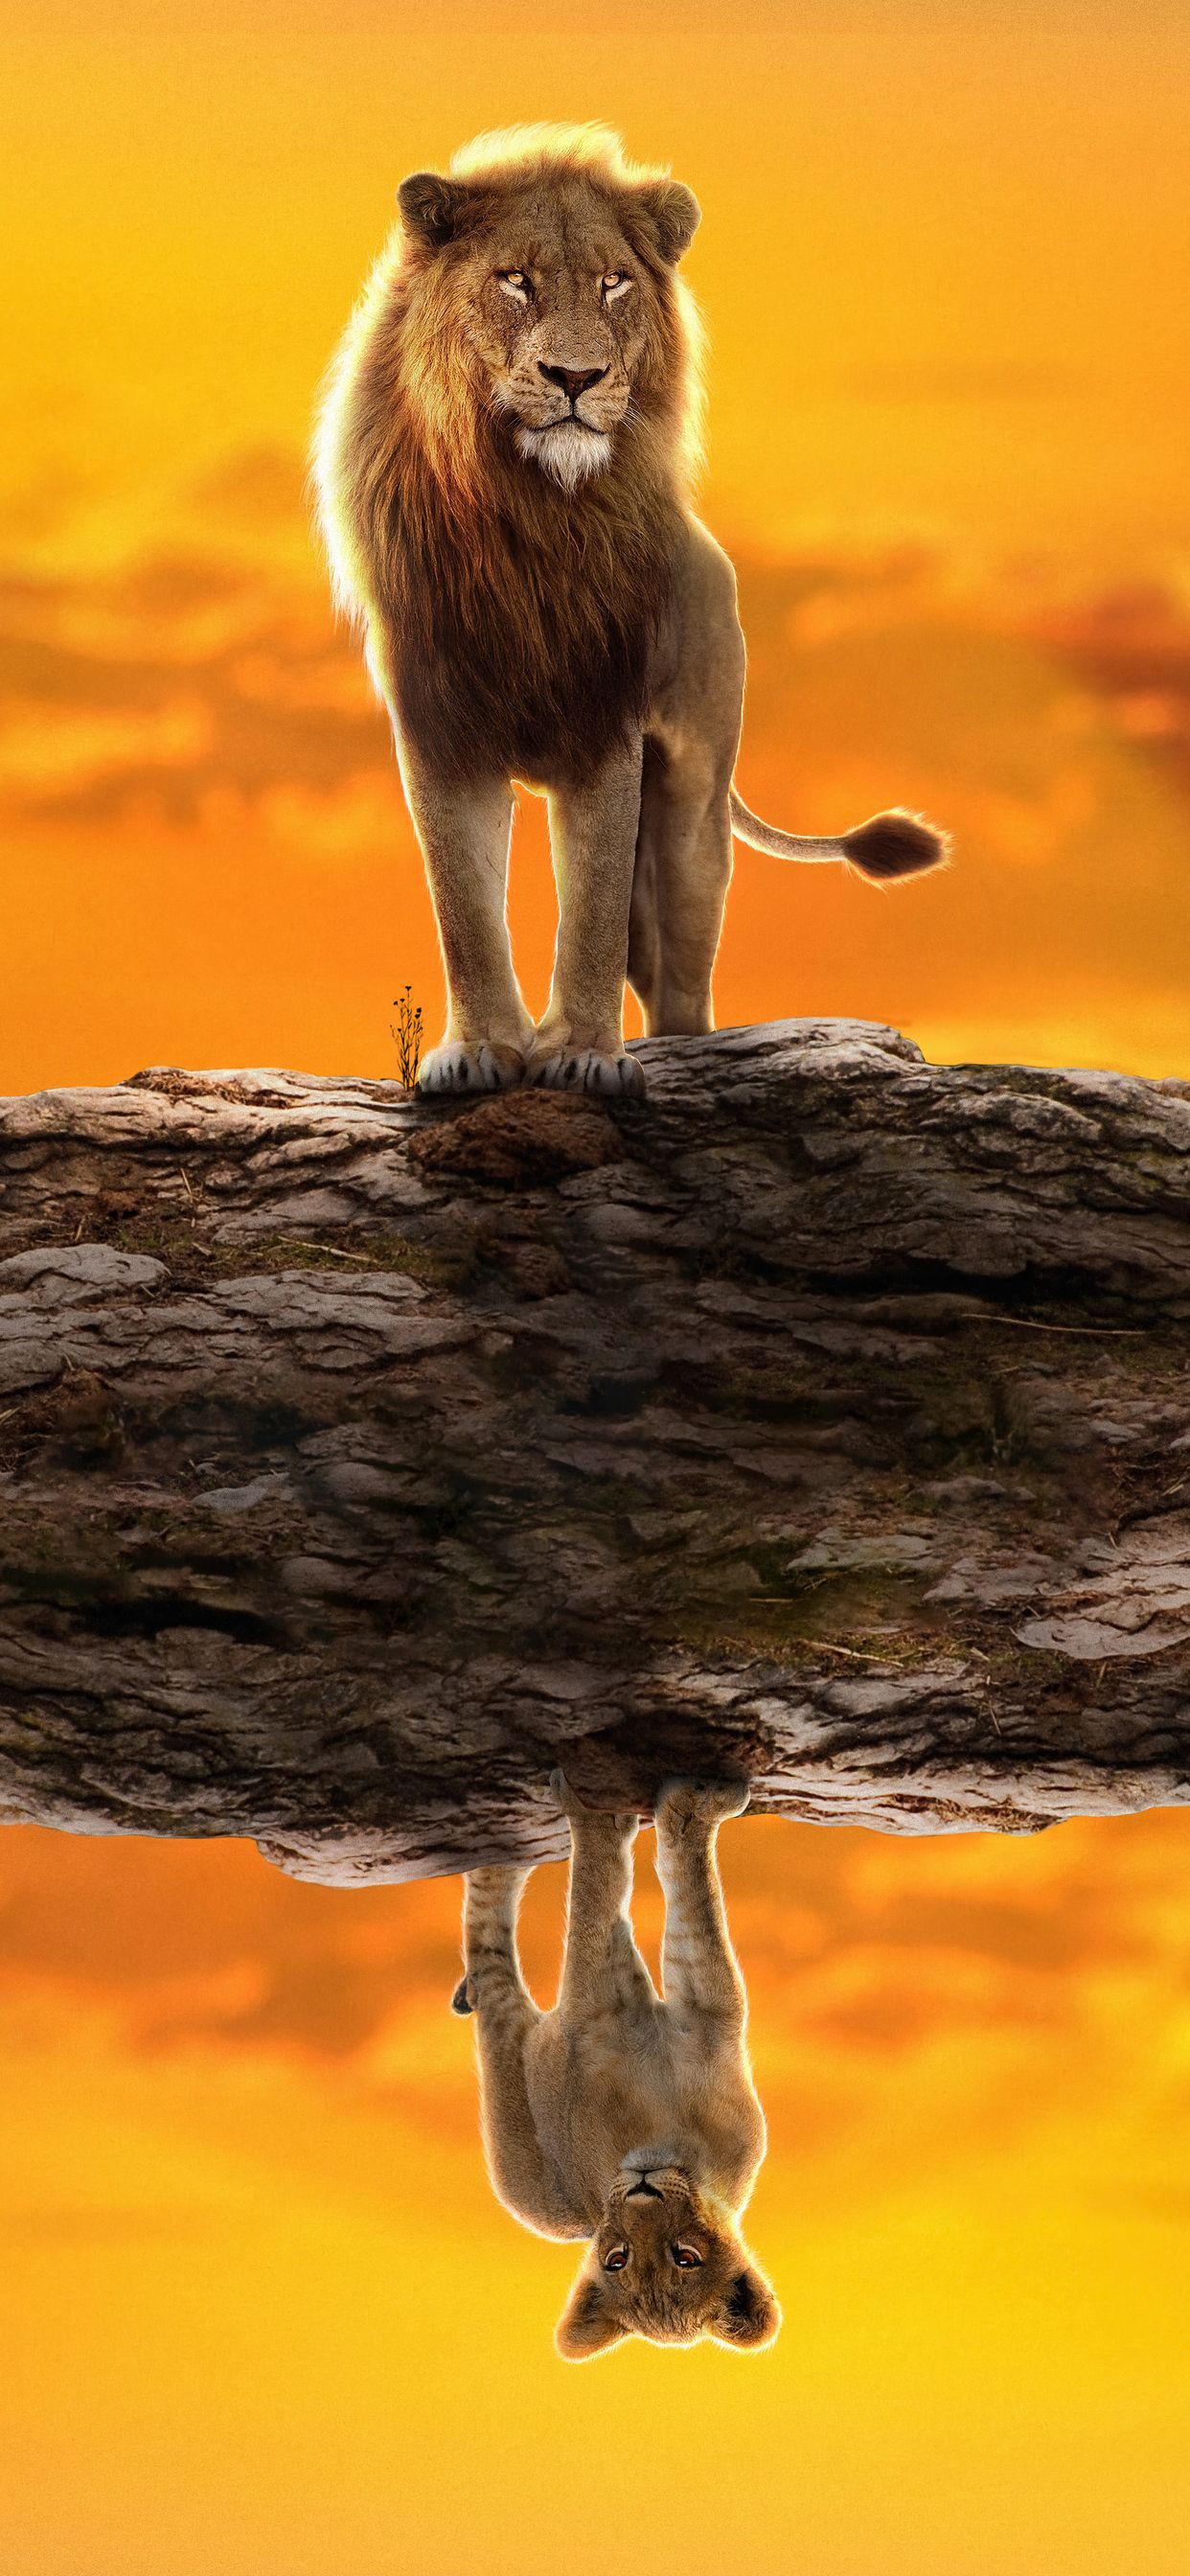 lion king wallpaper iphone latest